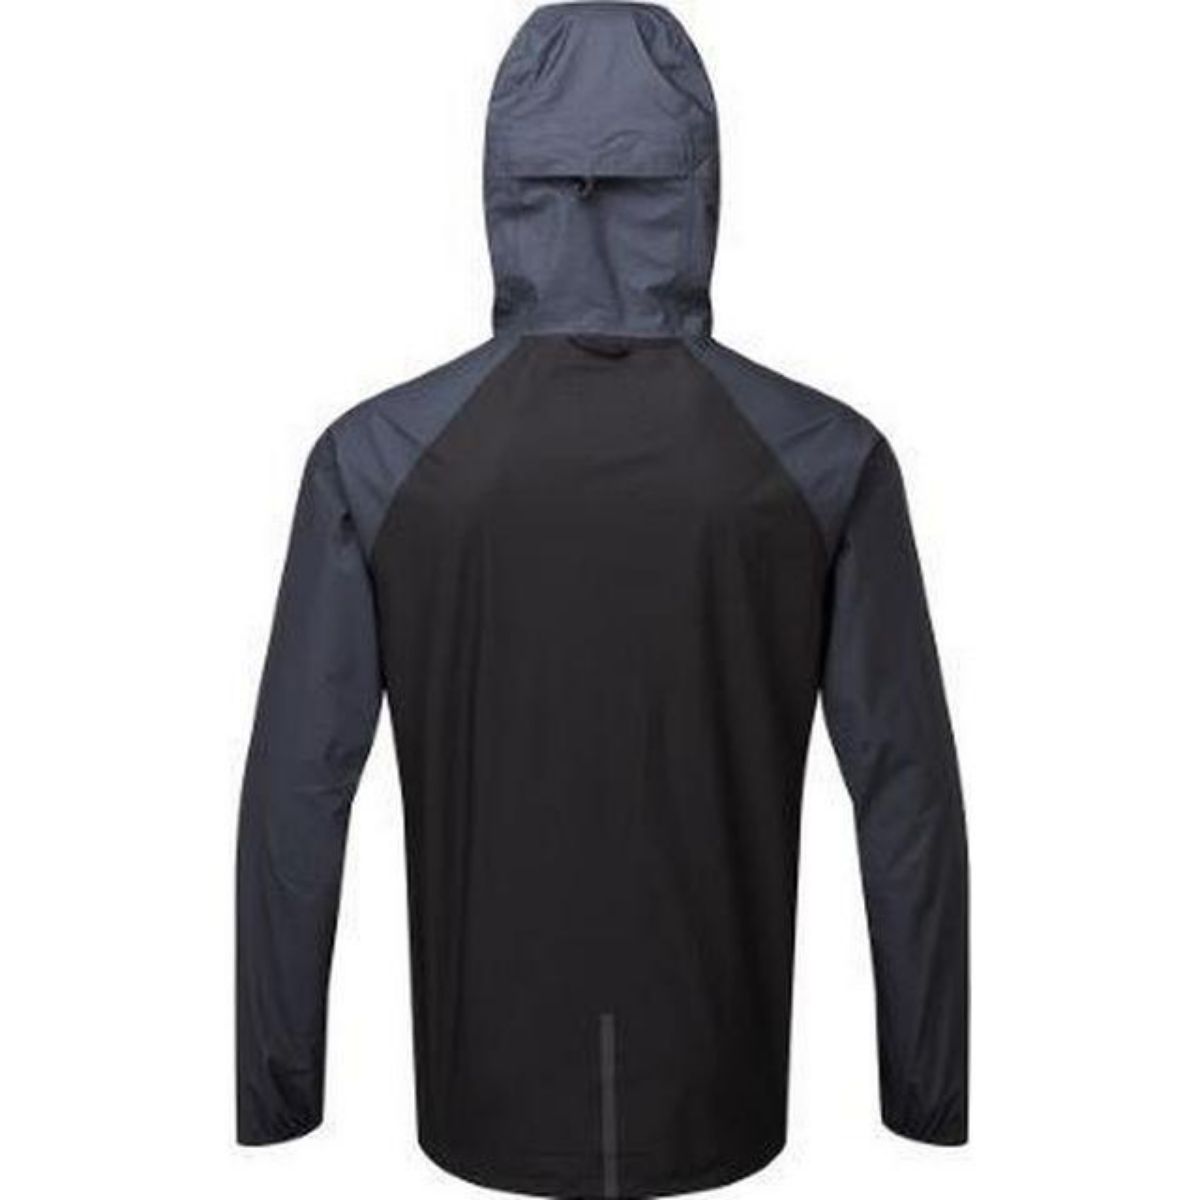 ron-hill-mens-tech-fortify-jacket-blackcharcoal